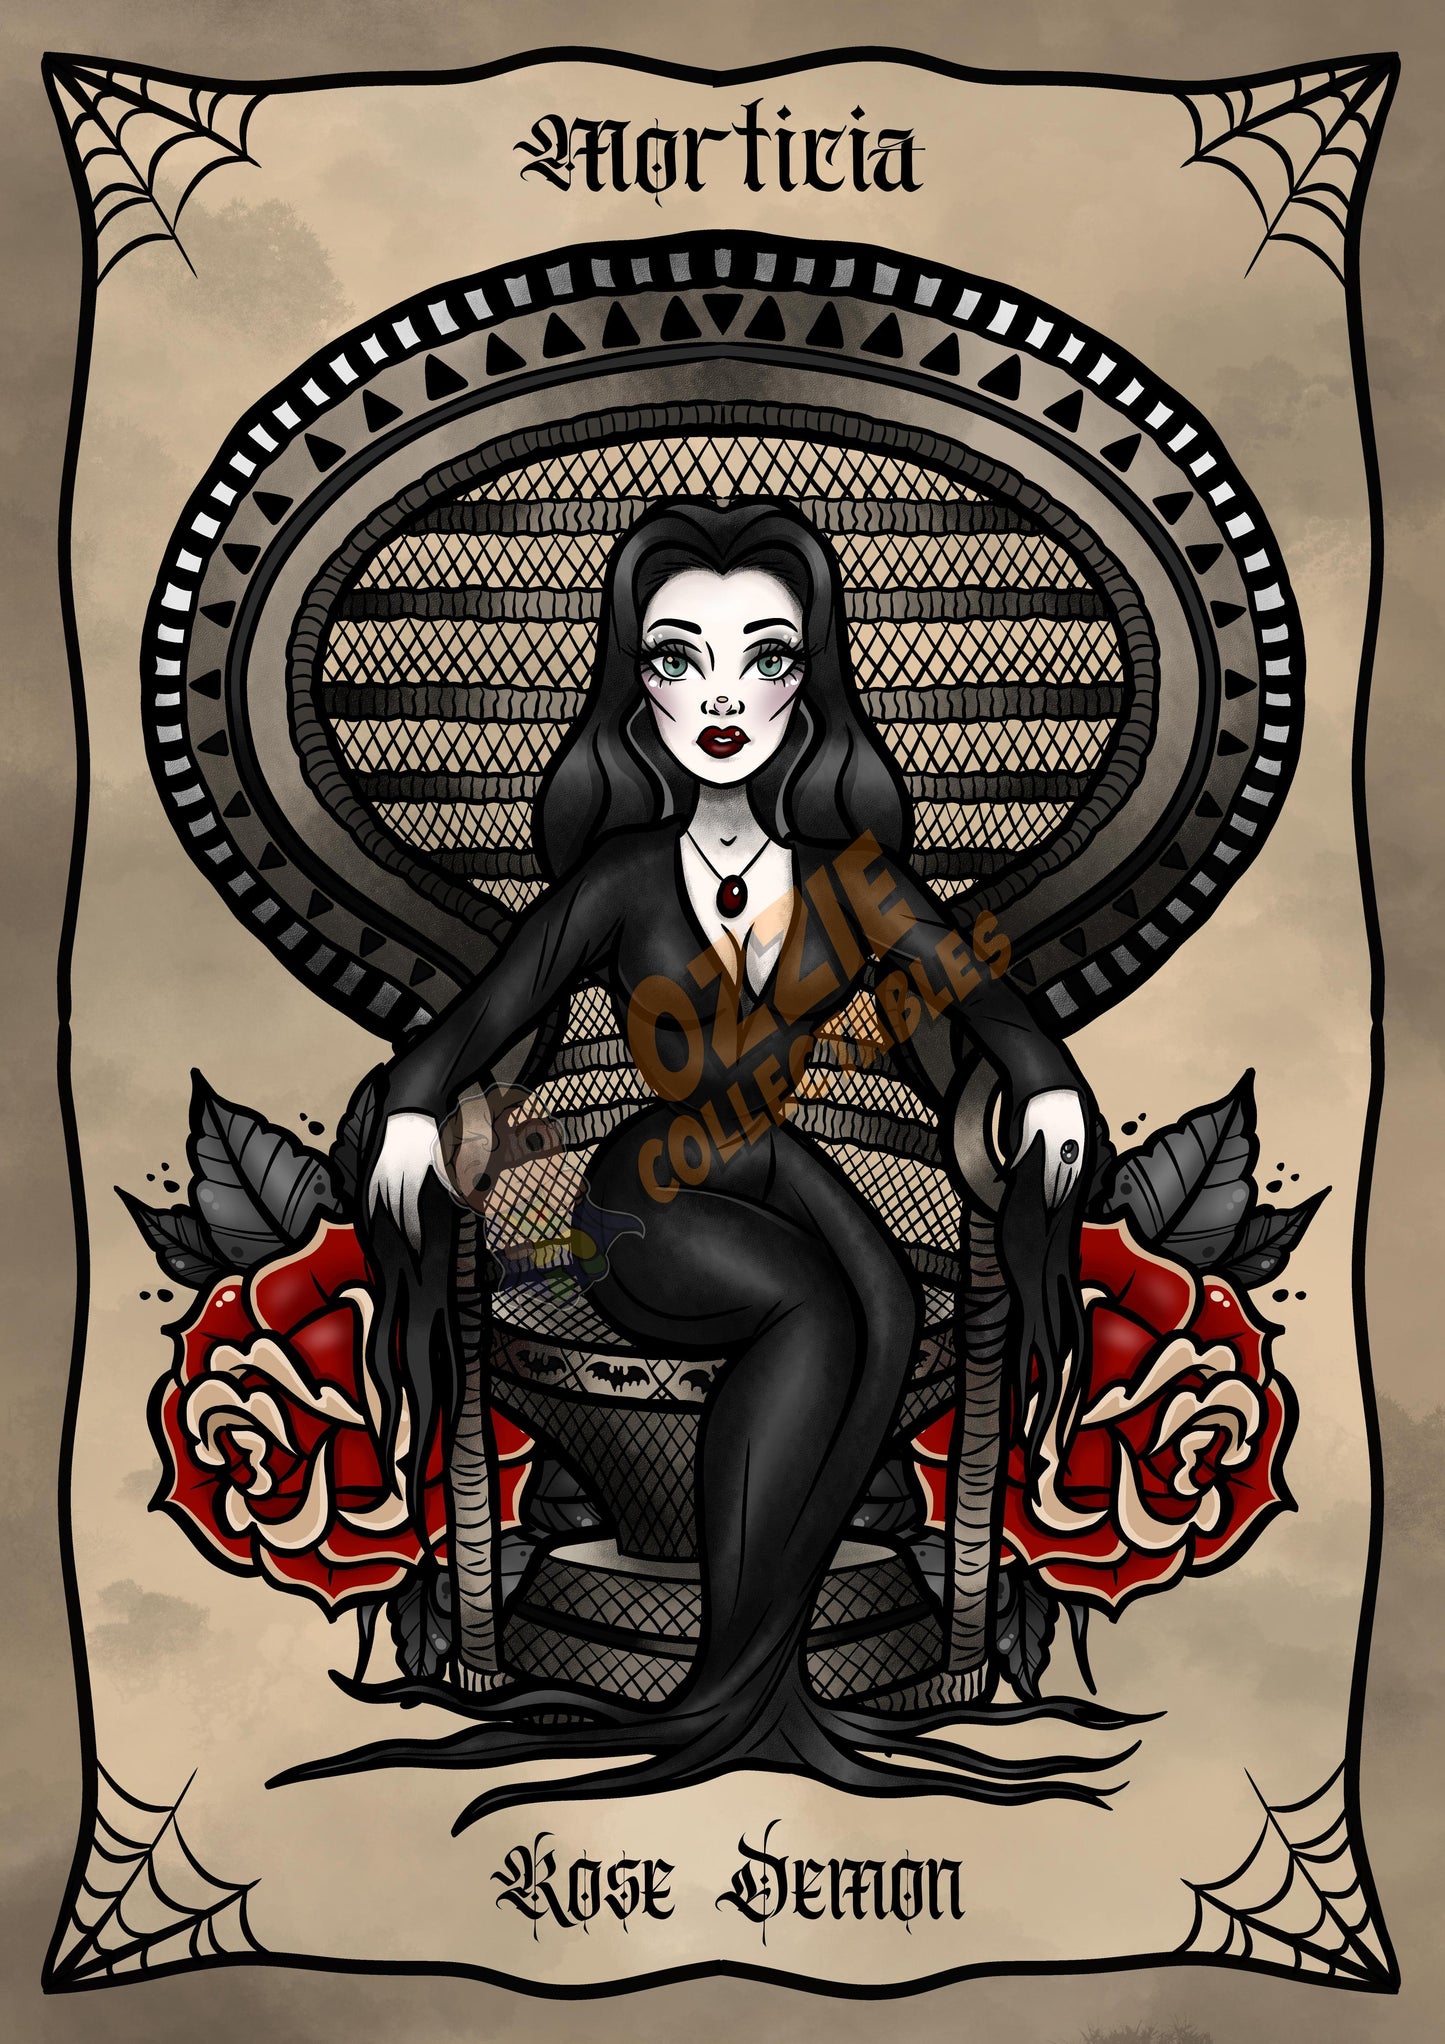 Morticia The Addams Family Tattoo FanArt Print by Rose Demon - RoseDemon Art Print Poster